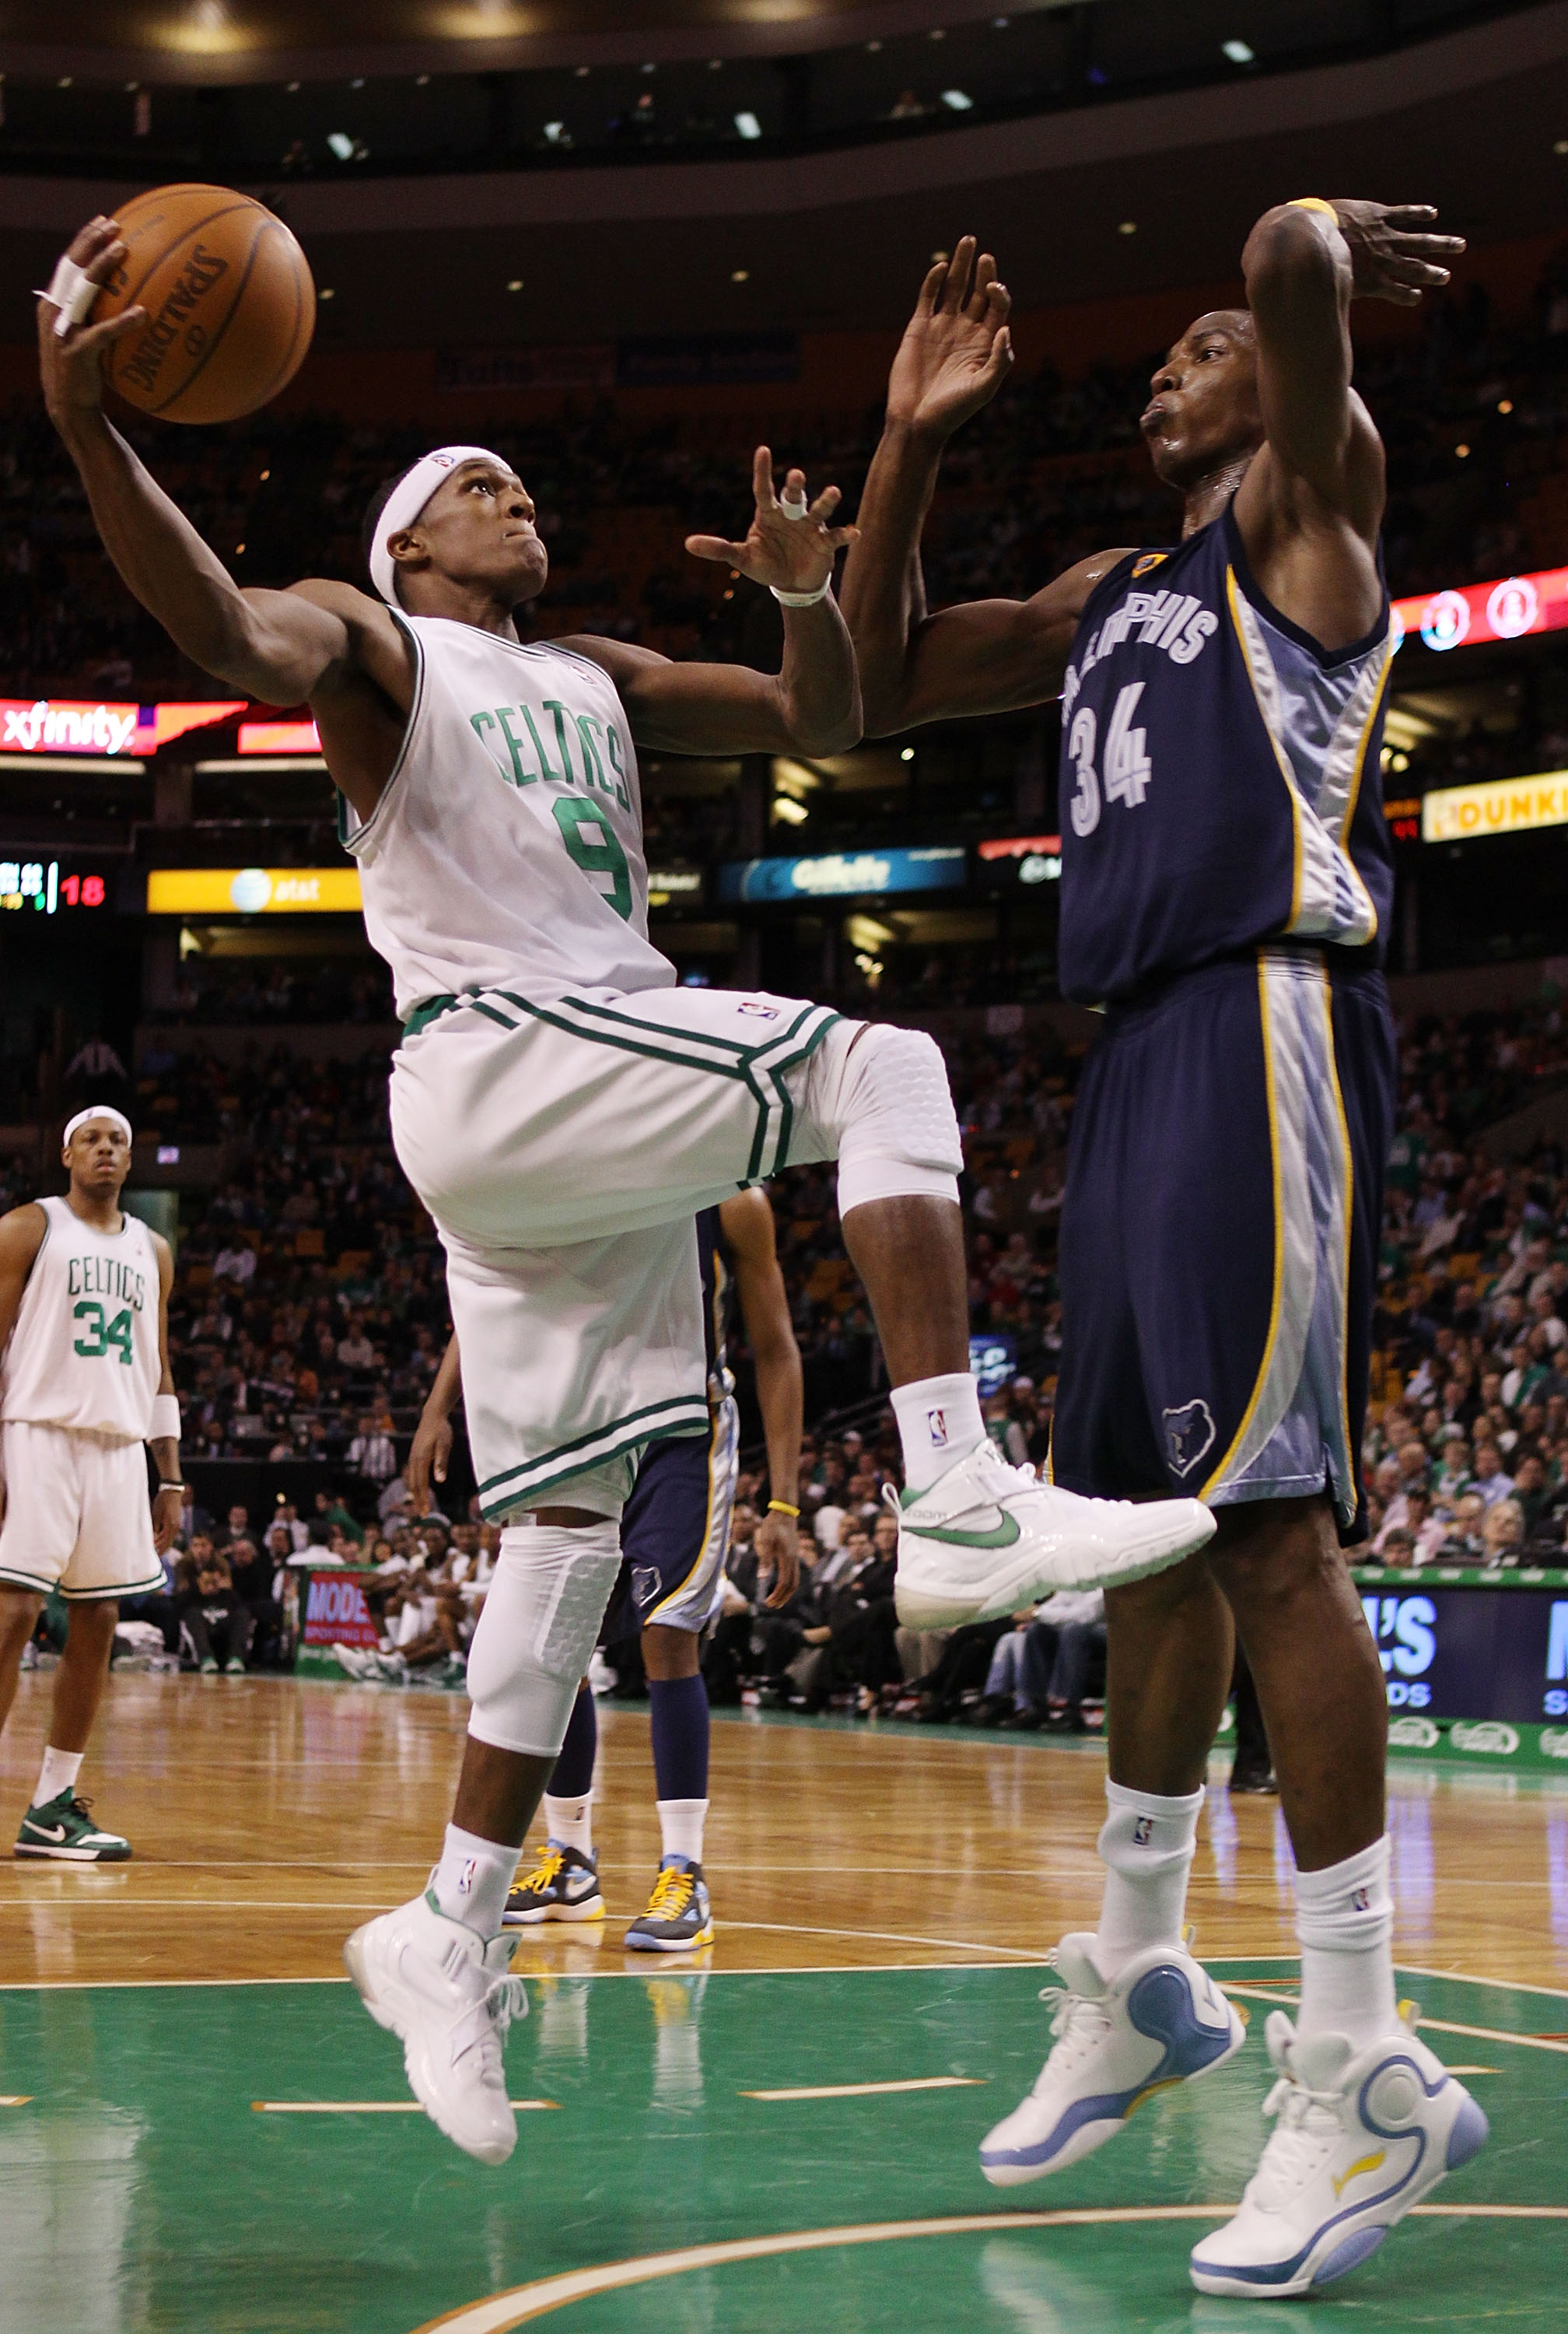 BOSTON - MARCH 10:  Rajon Rondo #9  of the Boston Celtics heads for the net as Hasheem Thabeet #34 of the Memphis Grizzlies defends on March 10, 2010 at the TD Garden in Boston, Massachusetts. The Grizzlies defeated the Celtics 111-91. NOTE TO USER: User